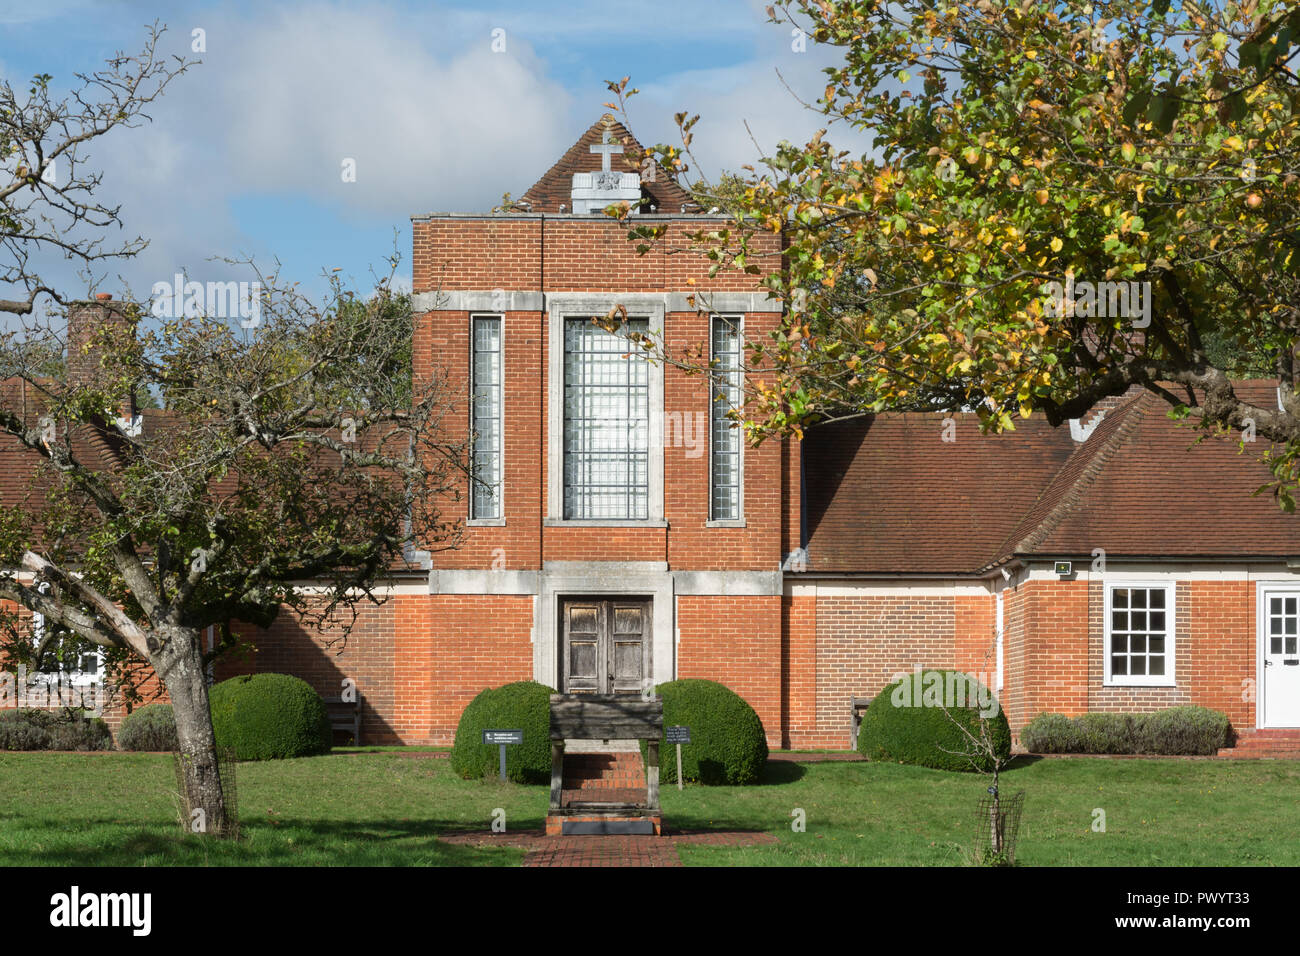 Sandham Memorial Chapel, a grade I listed 1920s decorated building, built to accommodate a series of paintings by the English artist Stanley Spencer Stock Photo